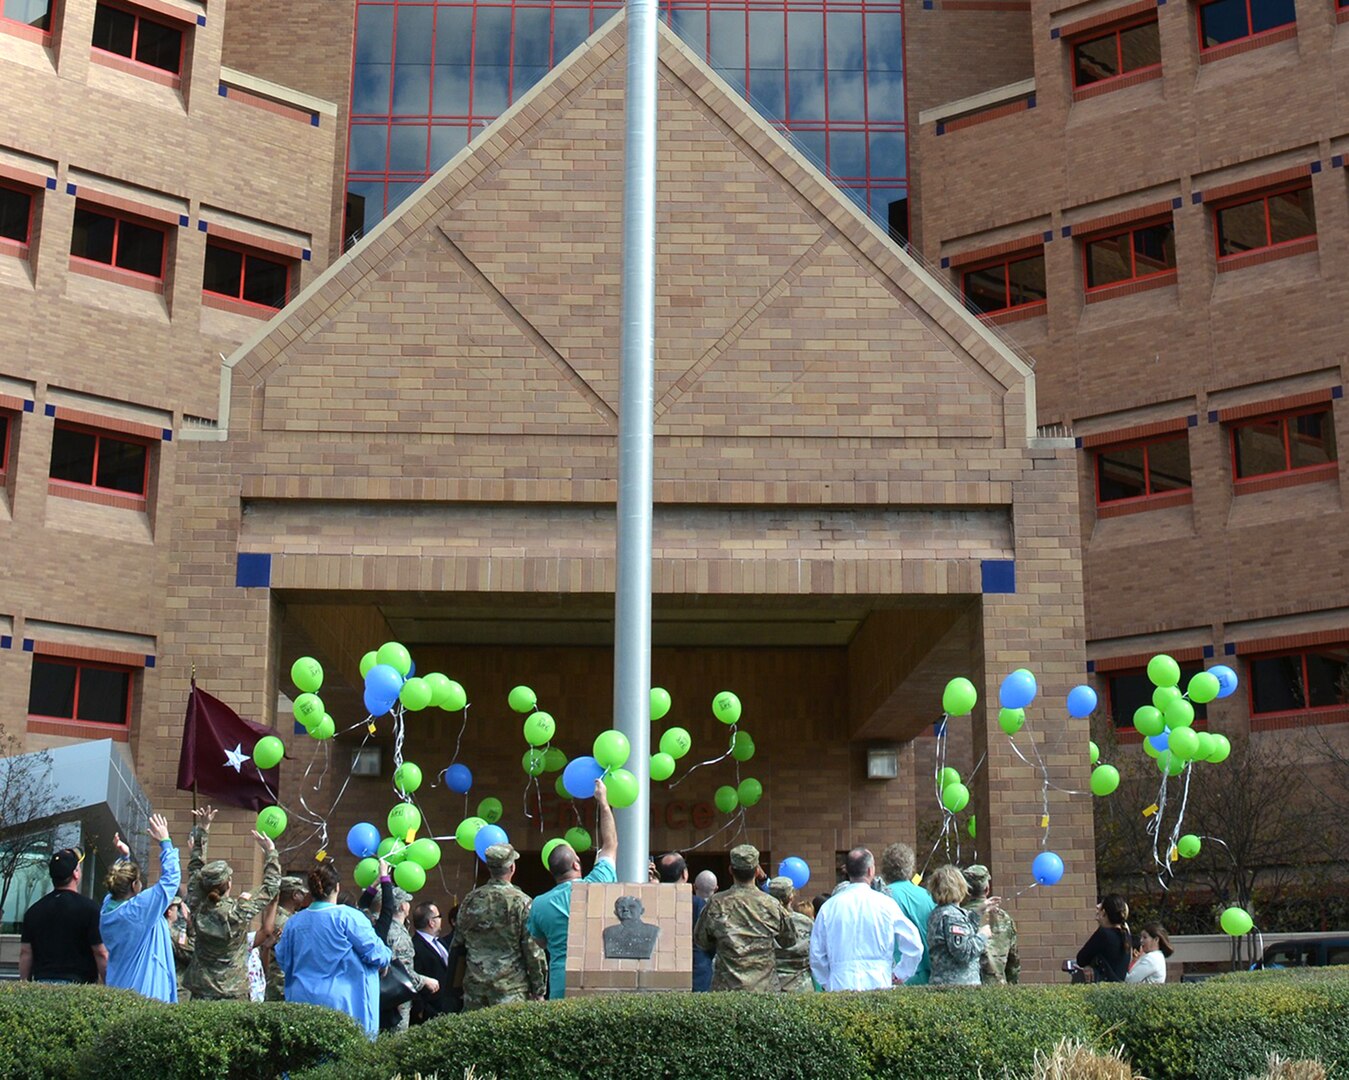 Brooke Army Medical Center kicks off the 2017 National Hospital Organ Donation Campaign with hundreds of balloons released to commemorate the day at the medical center Feb. 14.  Seventeen of those were dedicated to honor those who have given the gift of life to save others.